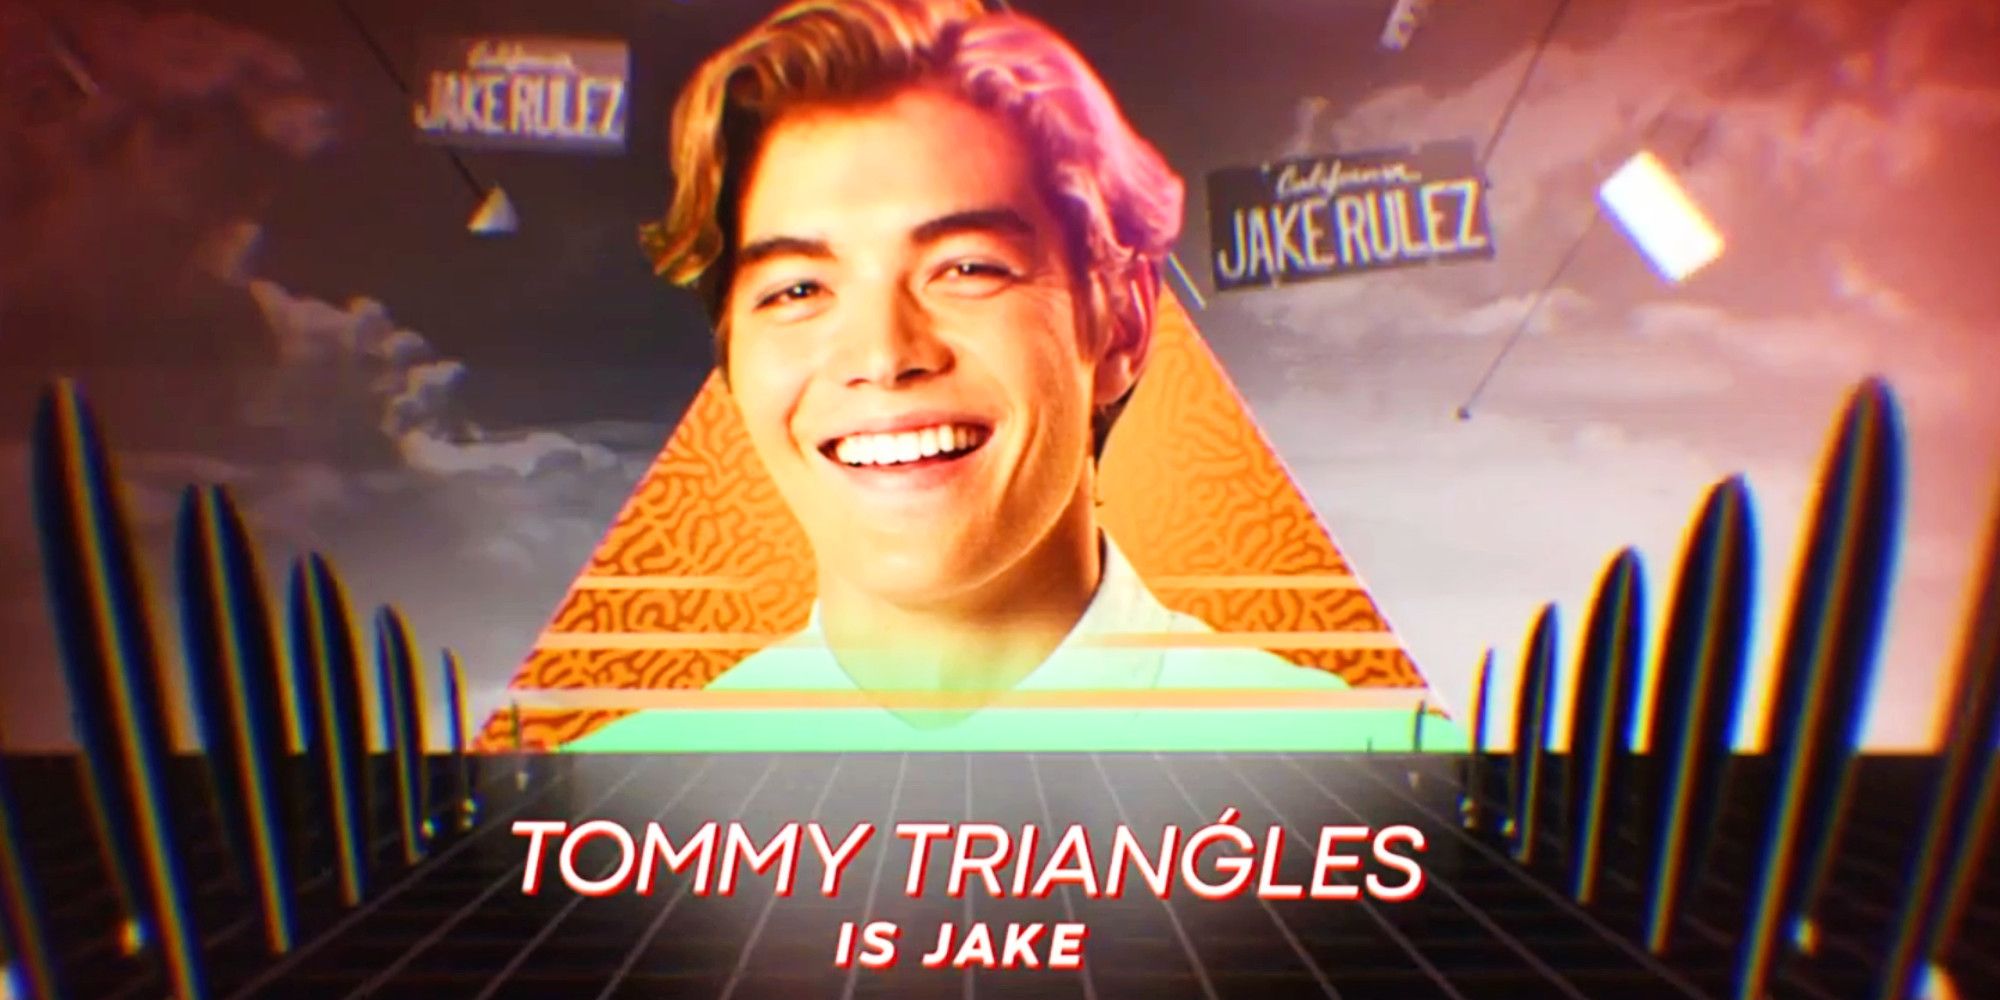 Matt Sato as Tommy Triangles as Jake in Saved By The Bell Parody The Nick of Time